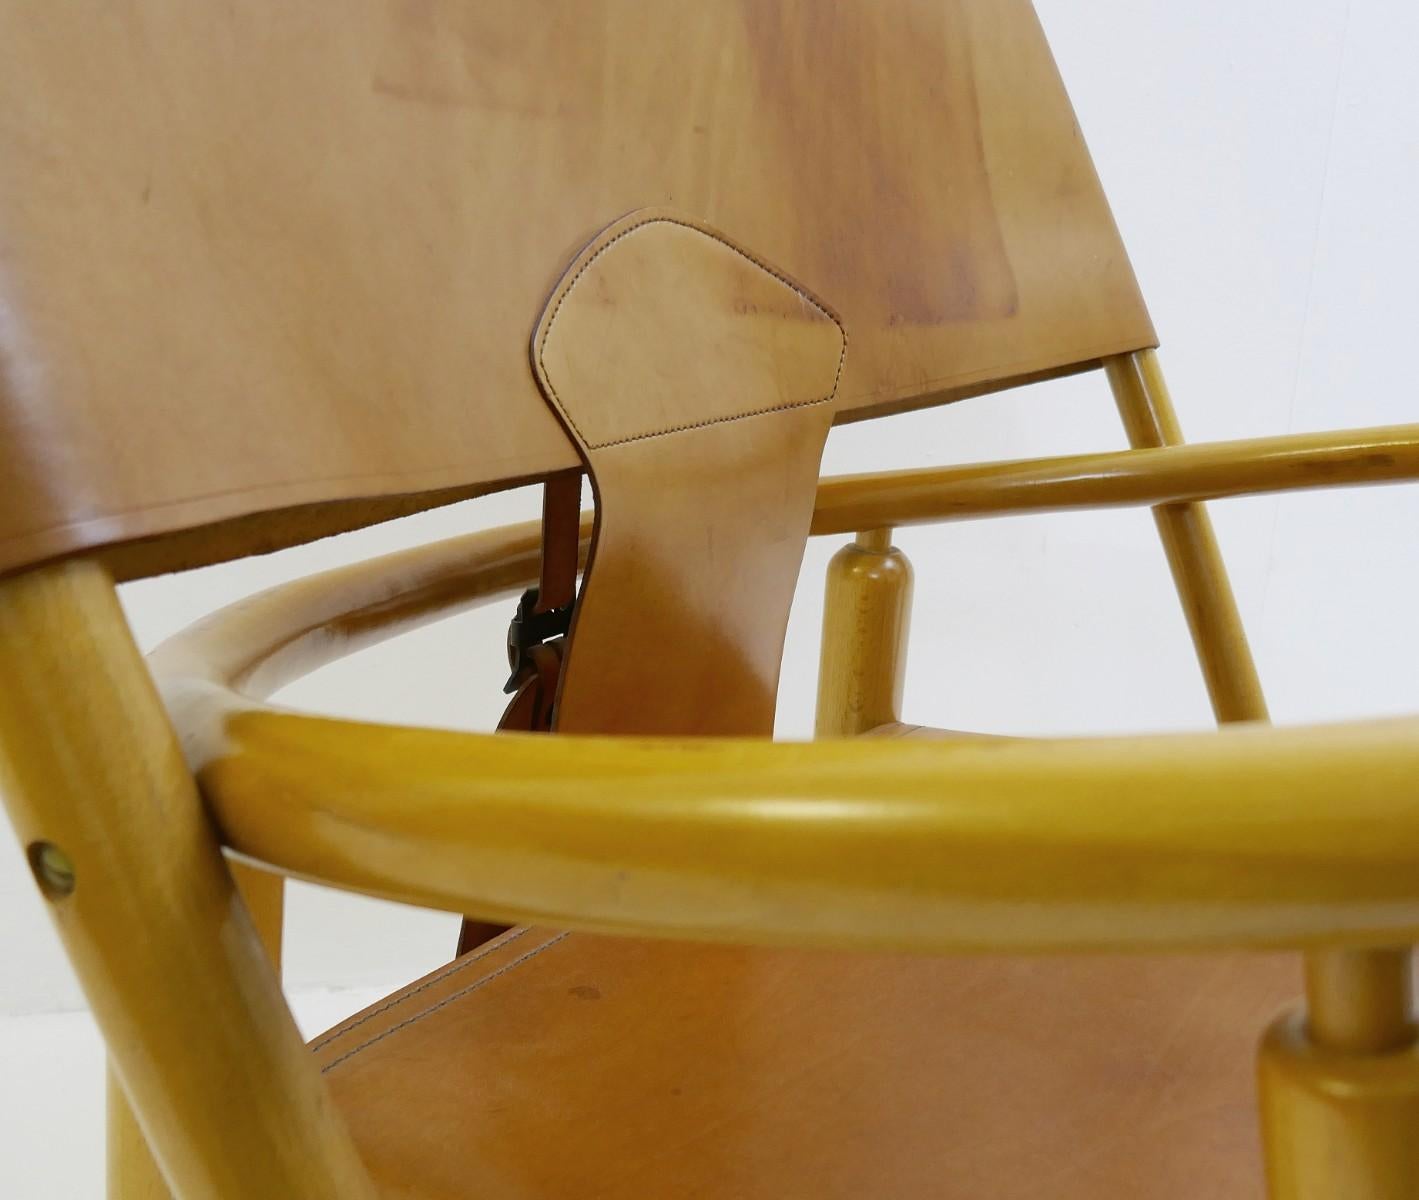 'Hoop' lounge chair by Piero Palange and Werther Toffoloni.